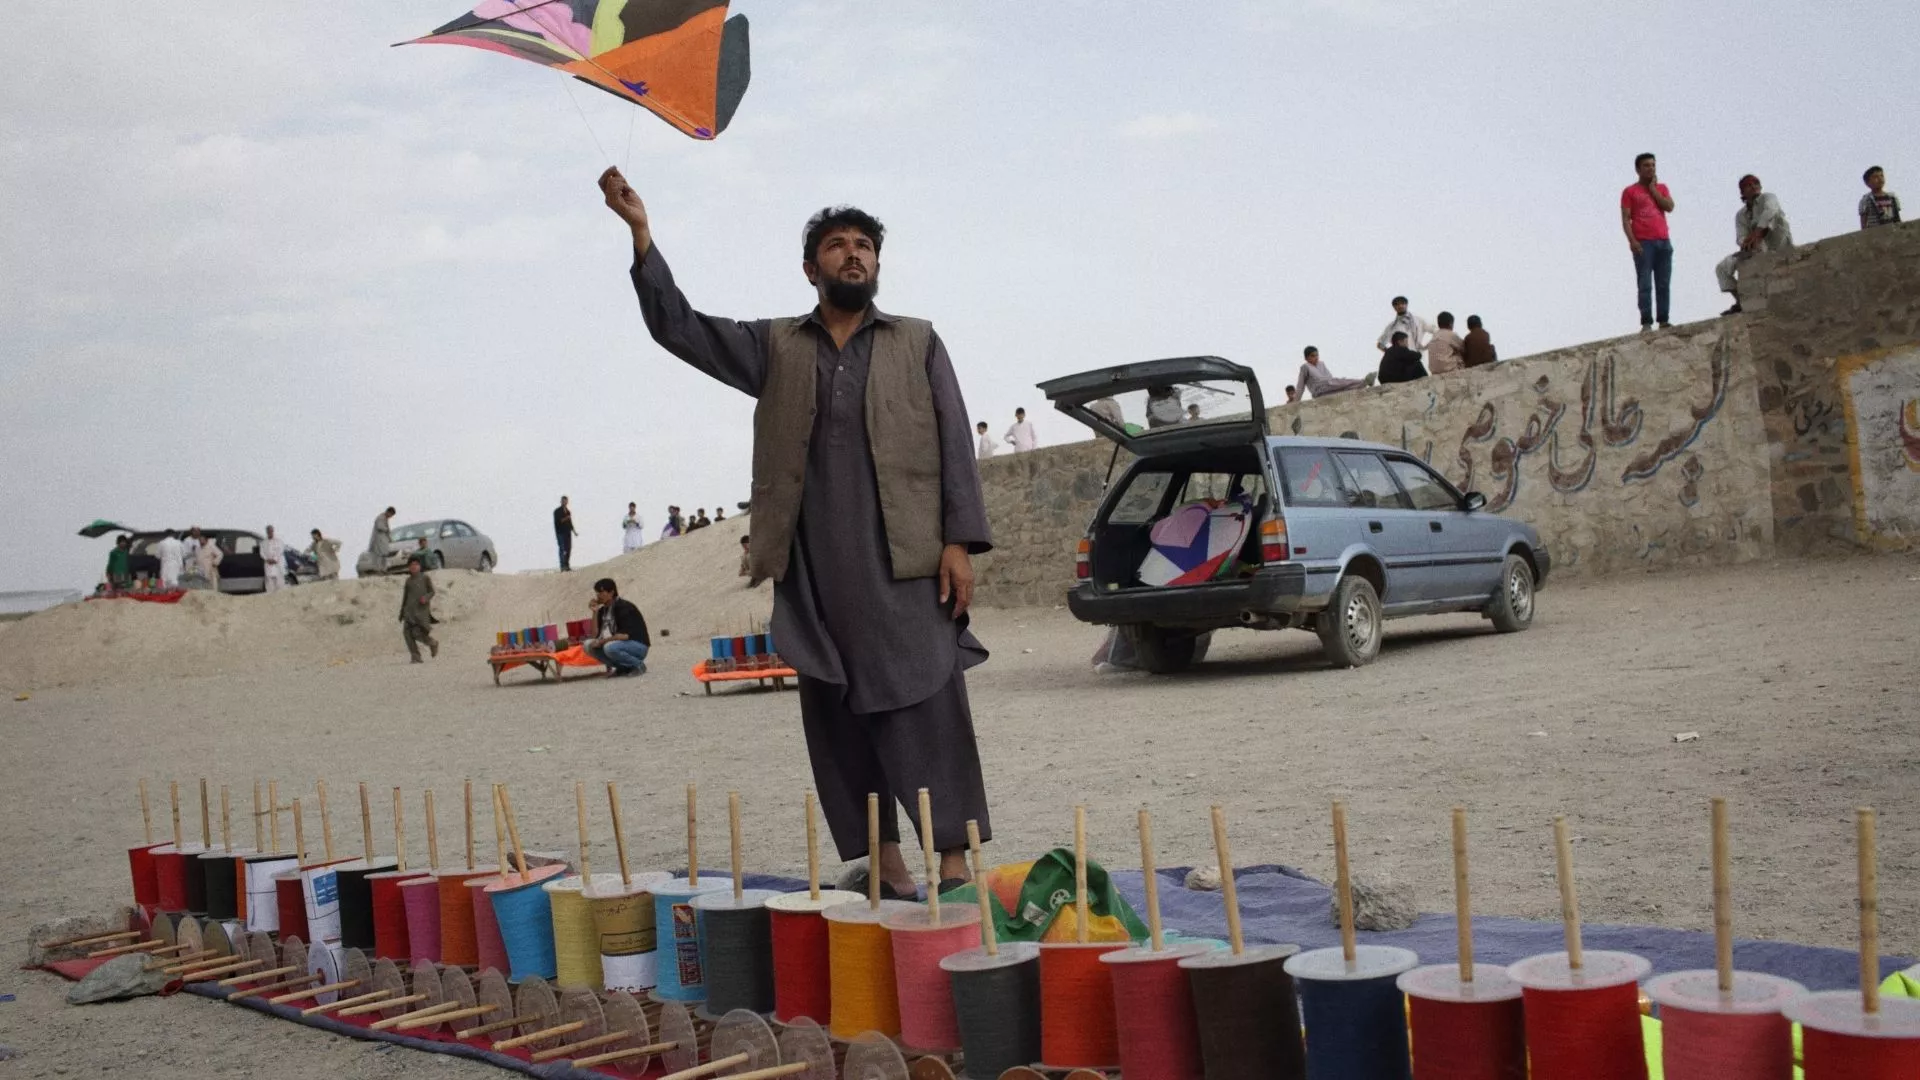 Khaled Hosseini and Afghanistan today